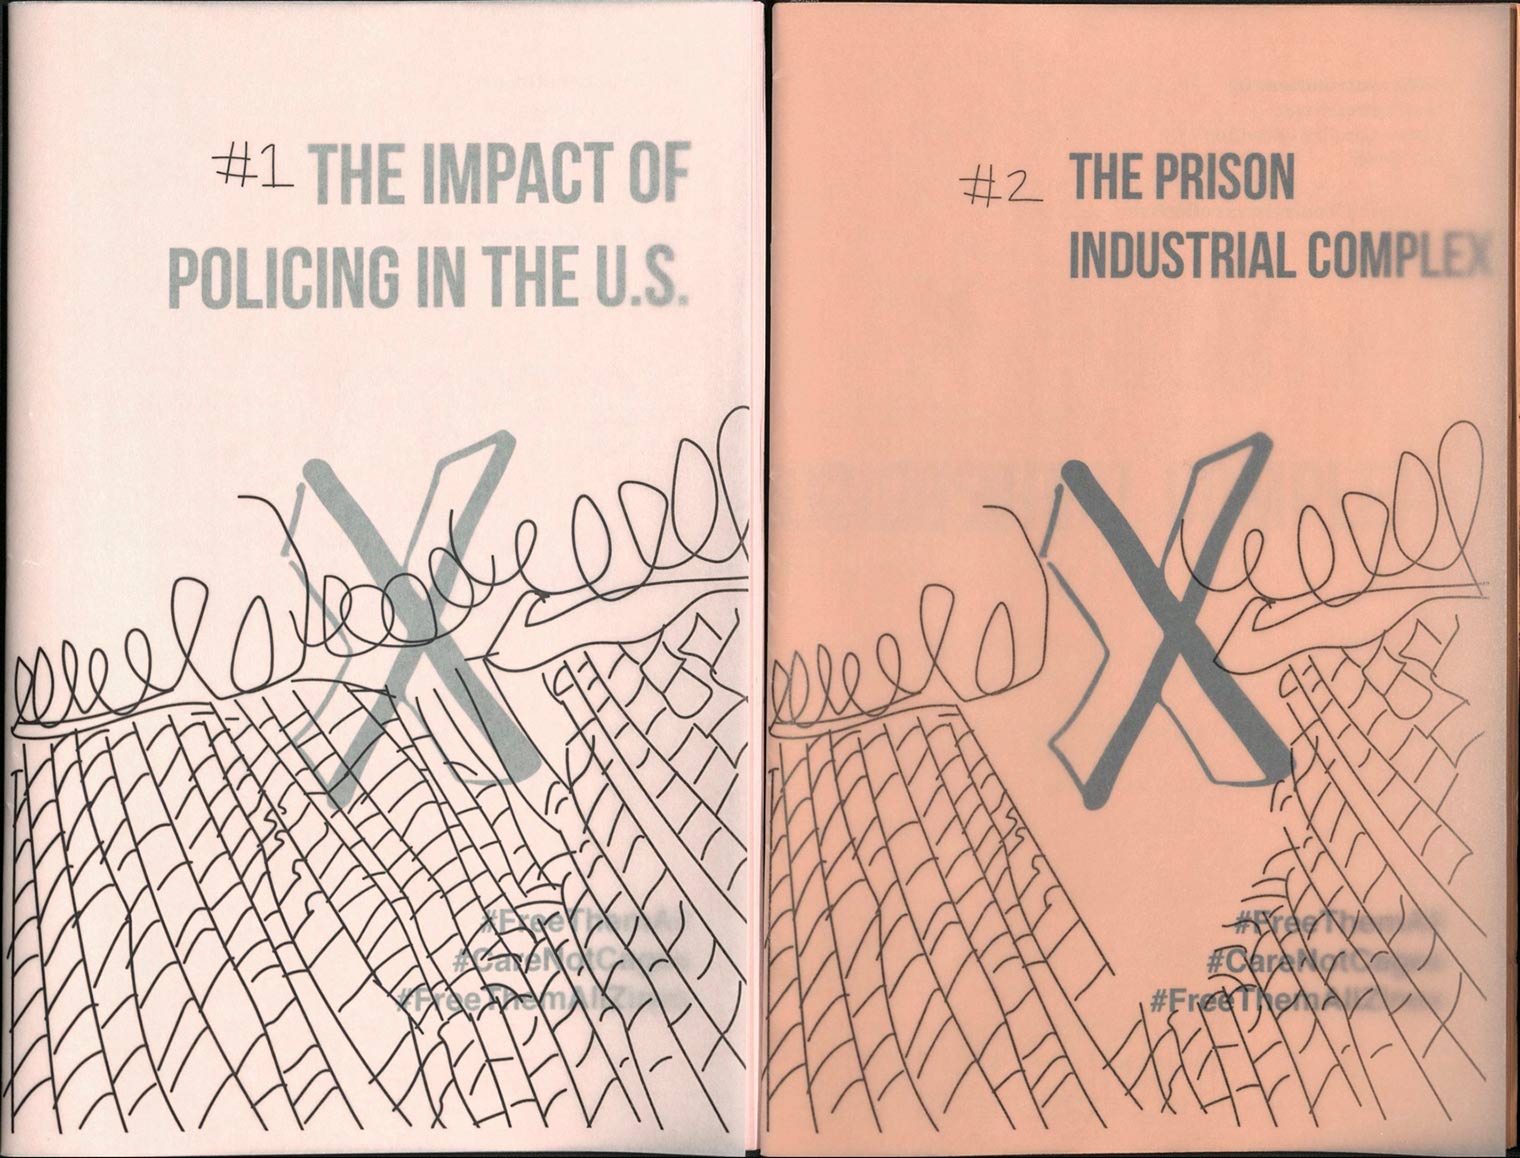 Two covers featuring an illustration of a border fence